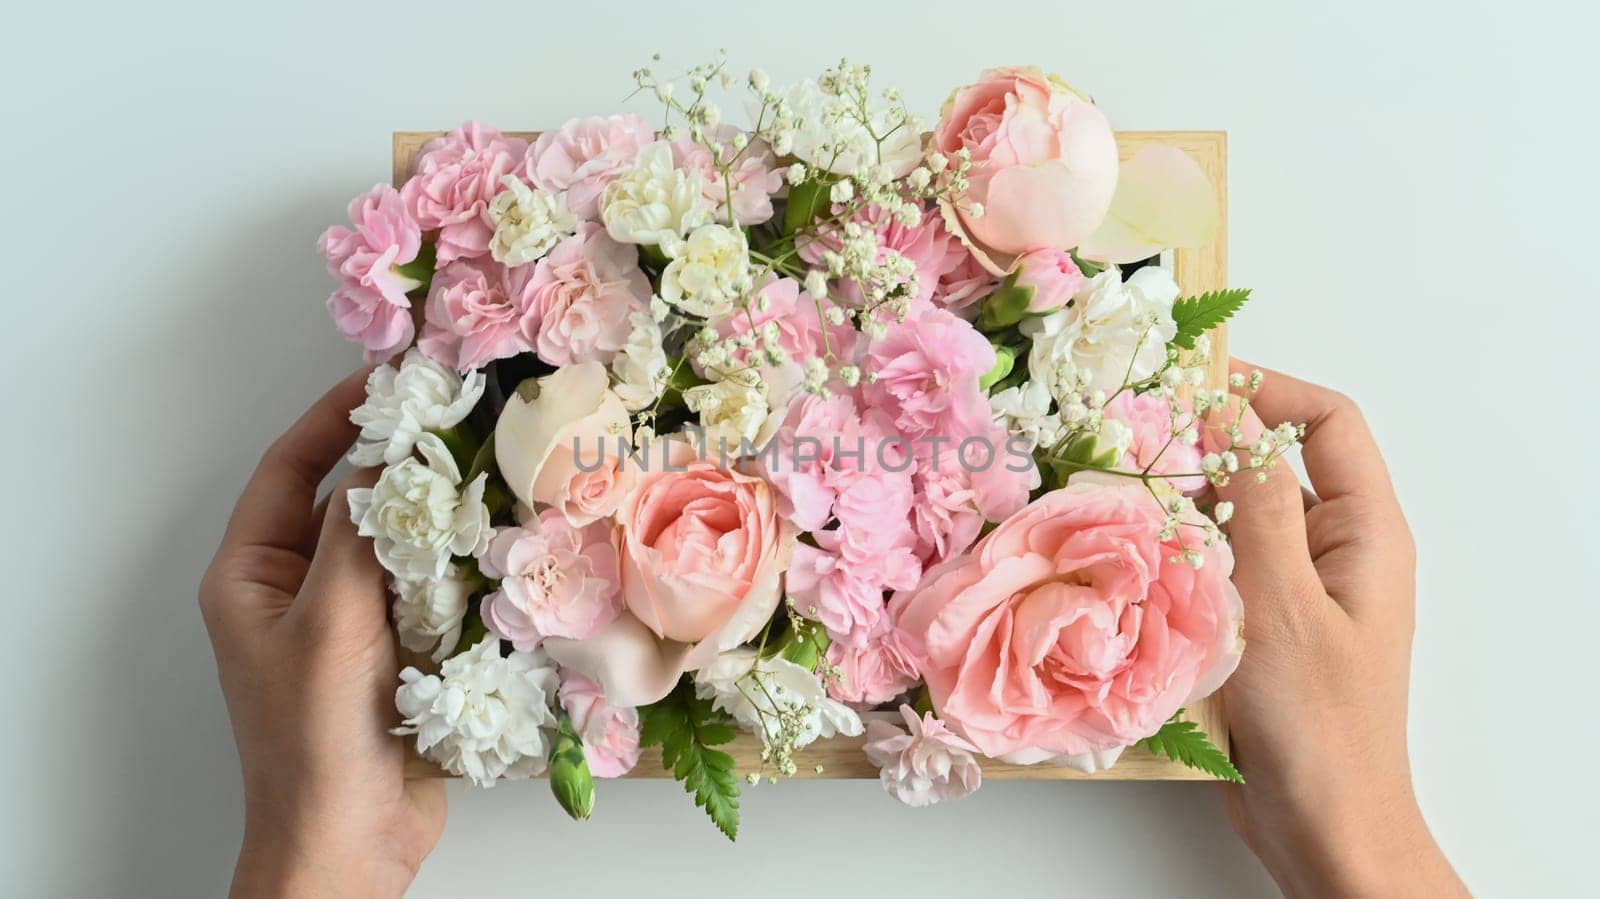 Hands holding wooden crate full of pastel colors flowers with pink rose and carnation on white background.